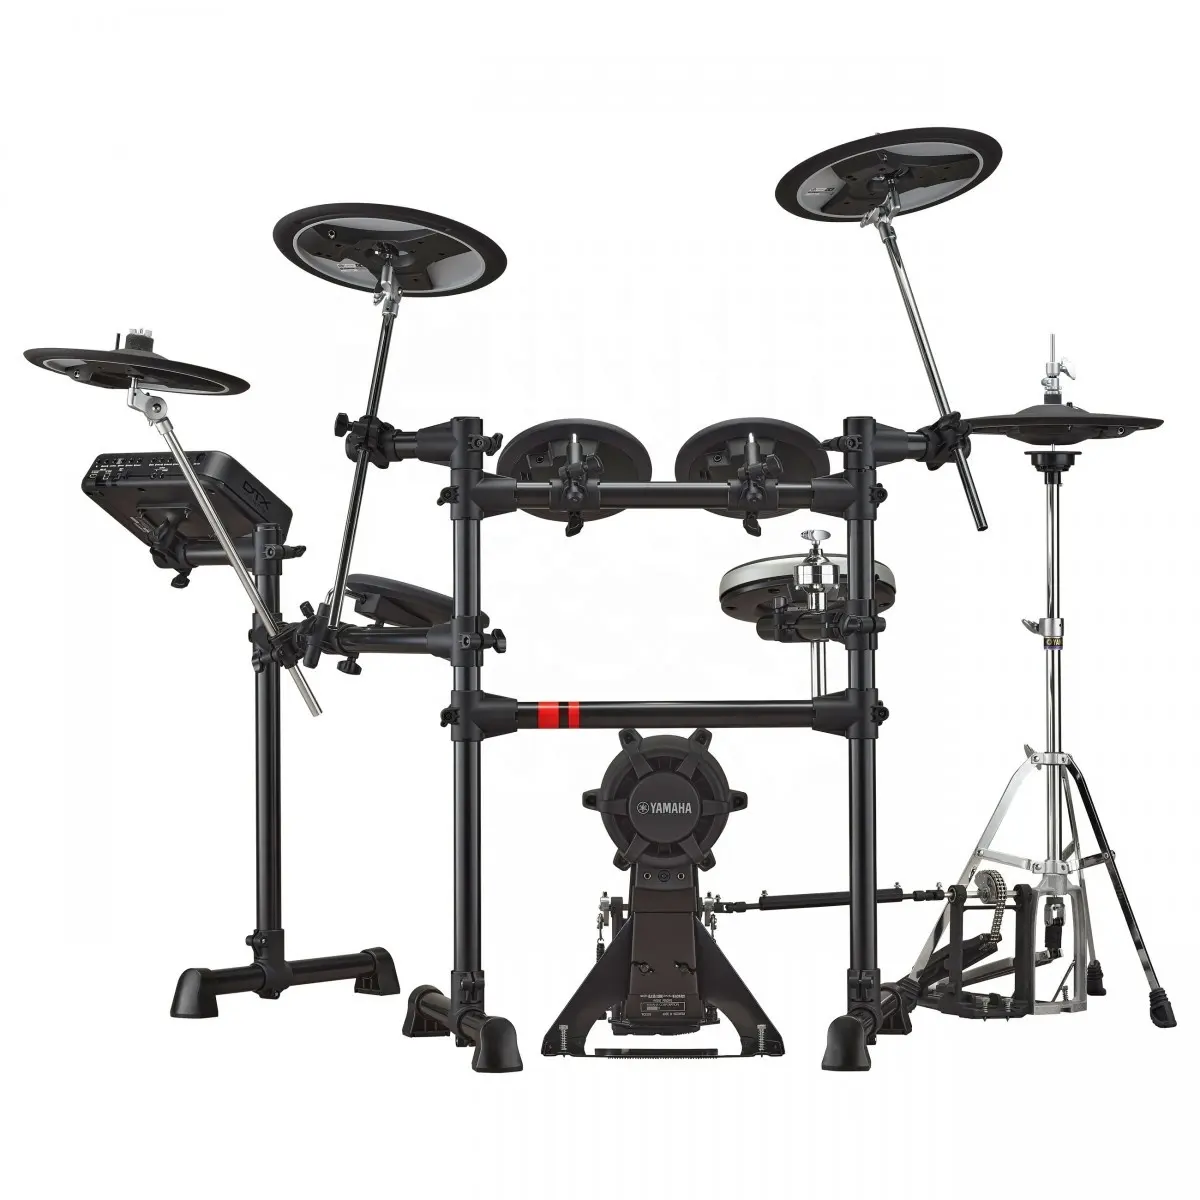 New Year Promo For New DTX6K2-X E-Drum Set